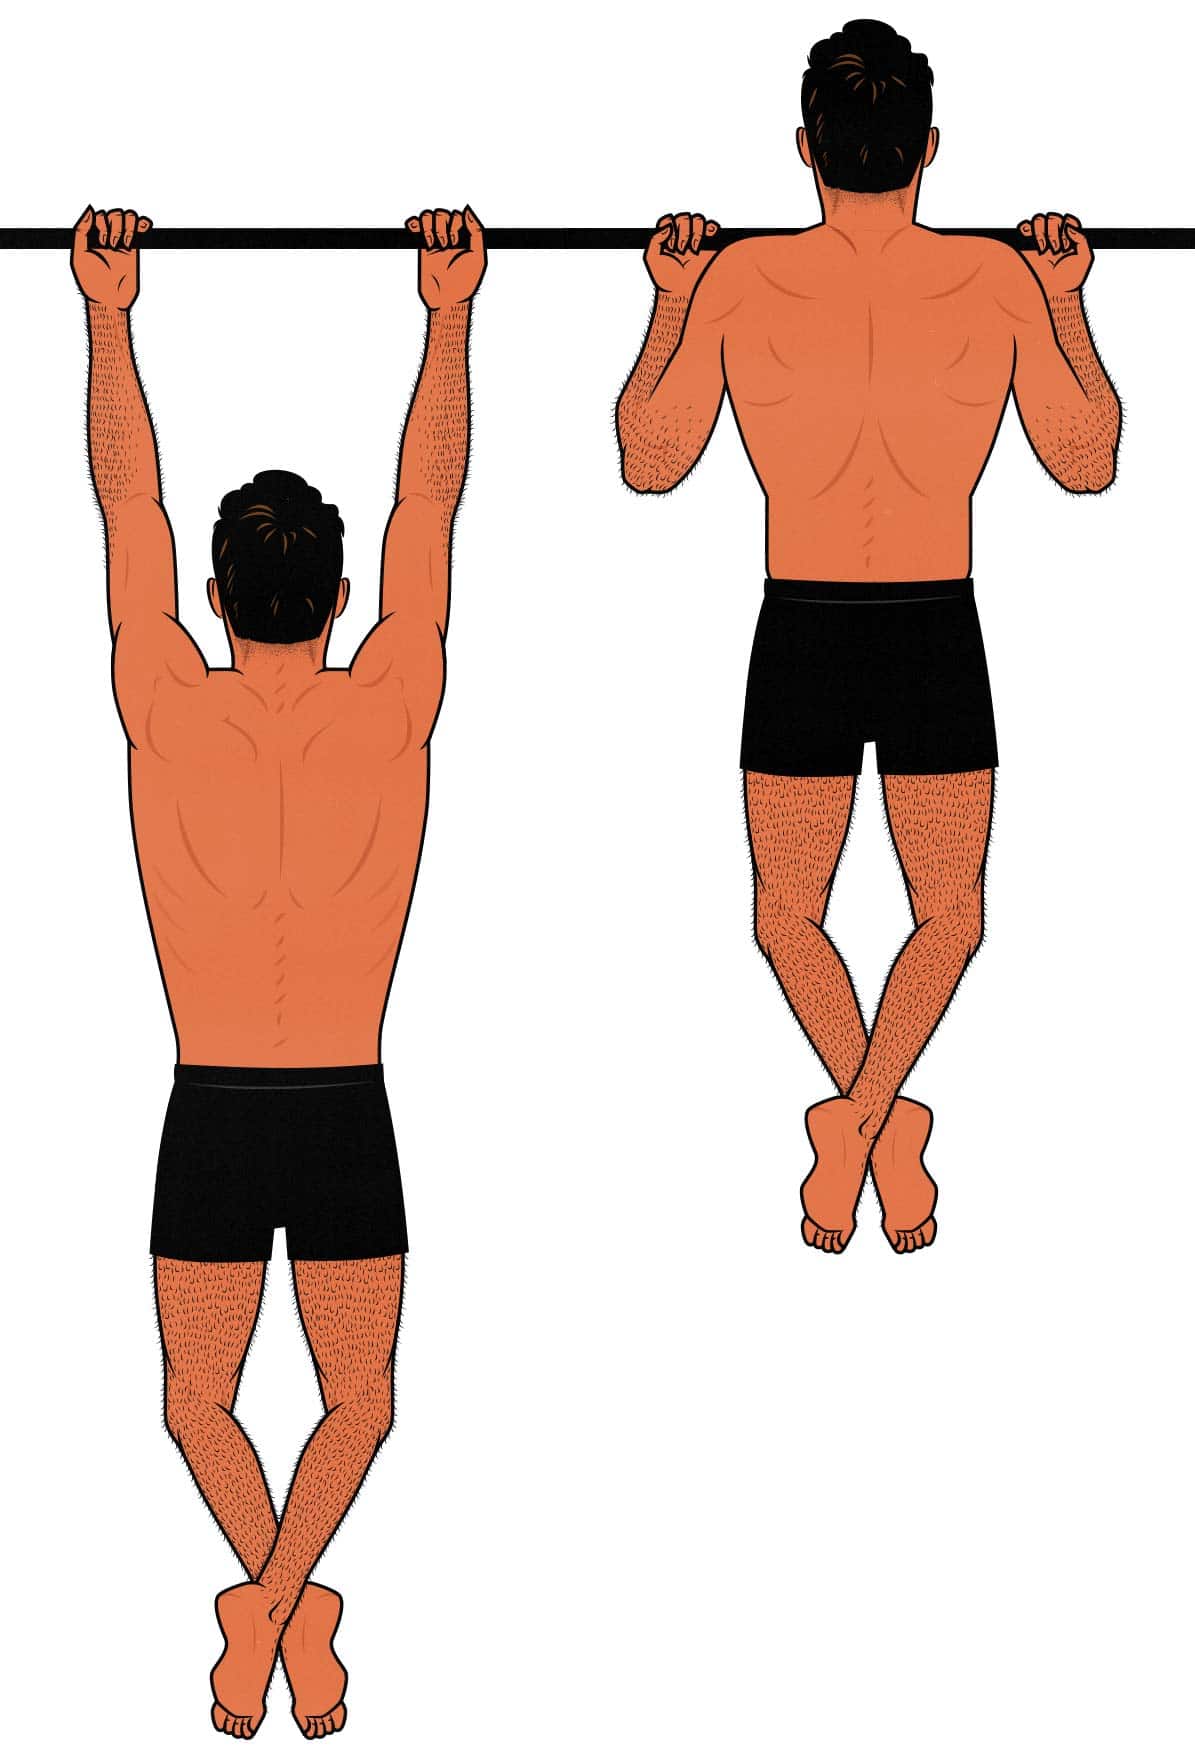 Illustration of a skinny guy doing bodyweight chin-ups to build muscle.